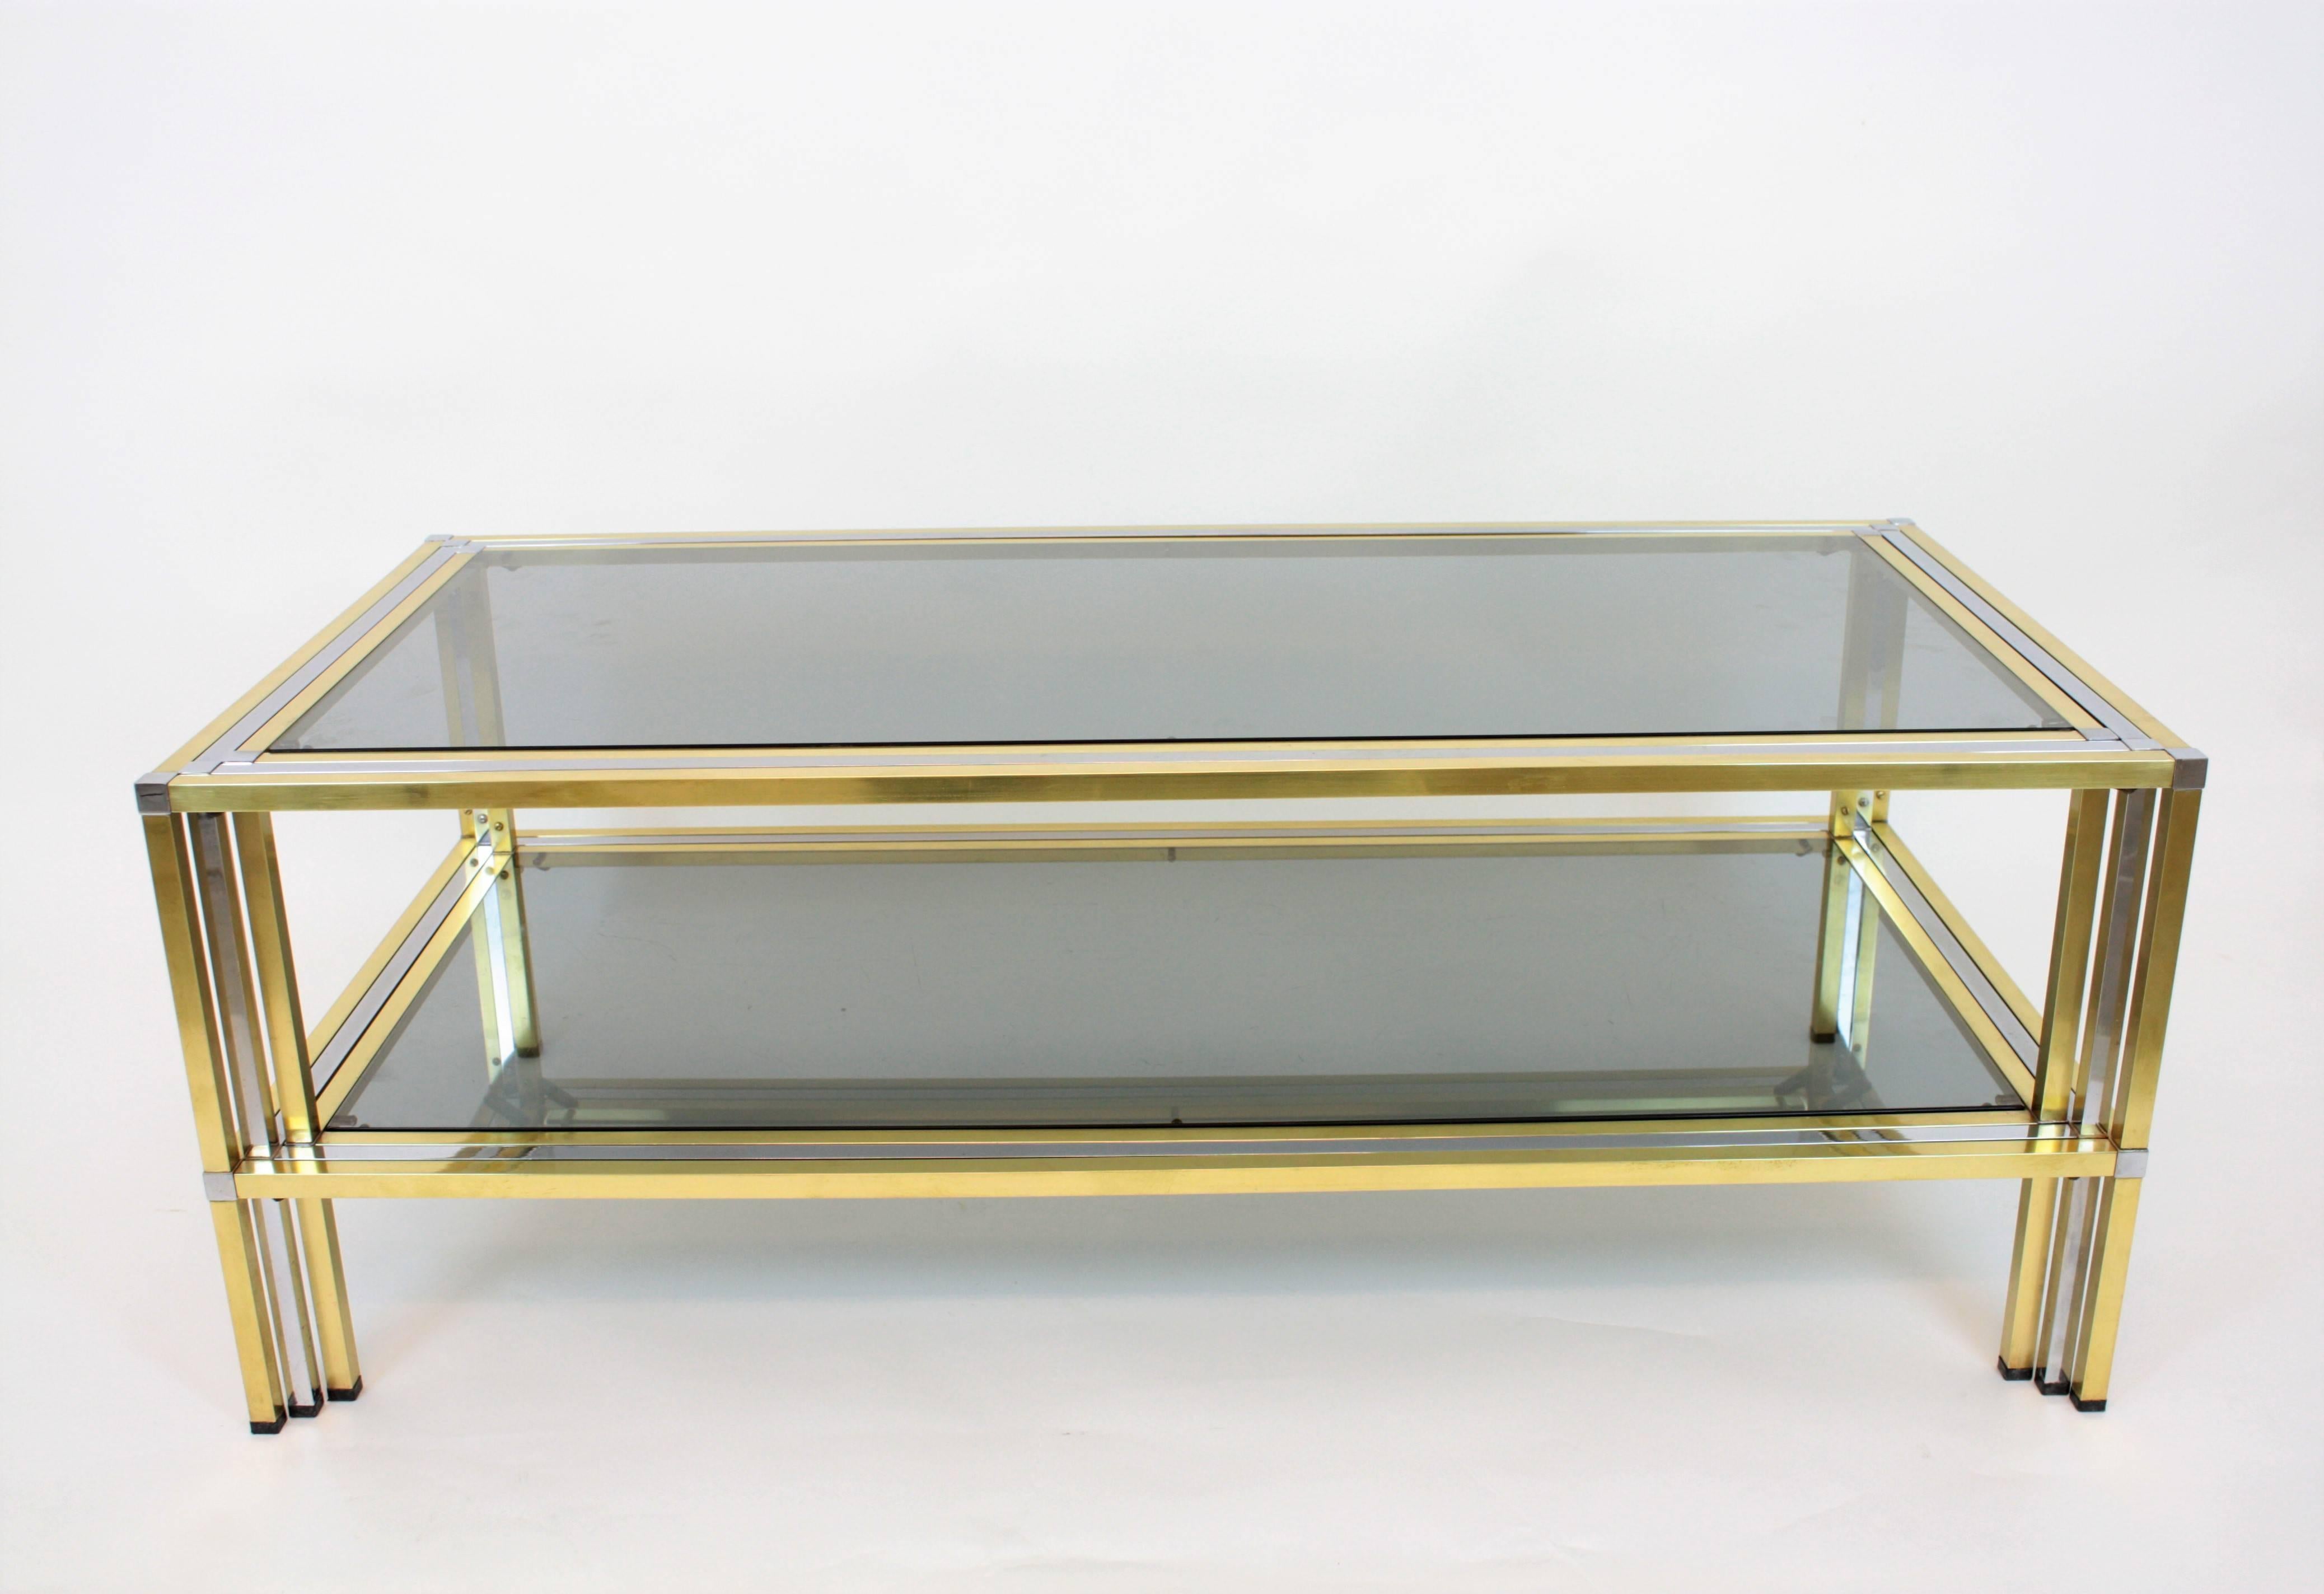 Brass and chromed steel Romeo Rega coffee table with smoked glasses,
Italy, 1970s.

100% insurance is included in all our shipments.
Join our profile as favourite dealer to receive our every Wednesday new listings.